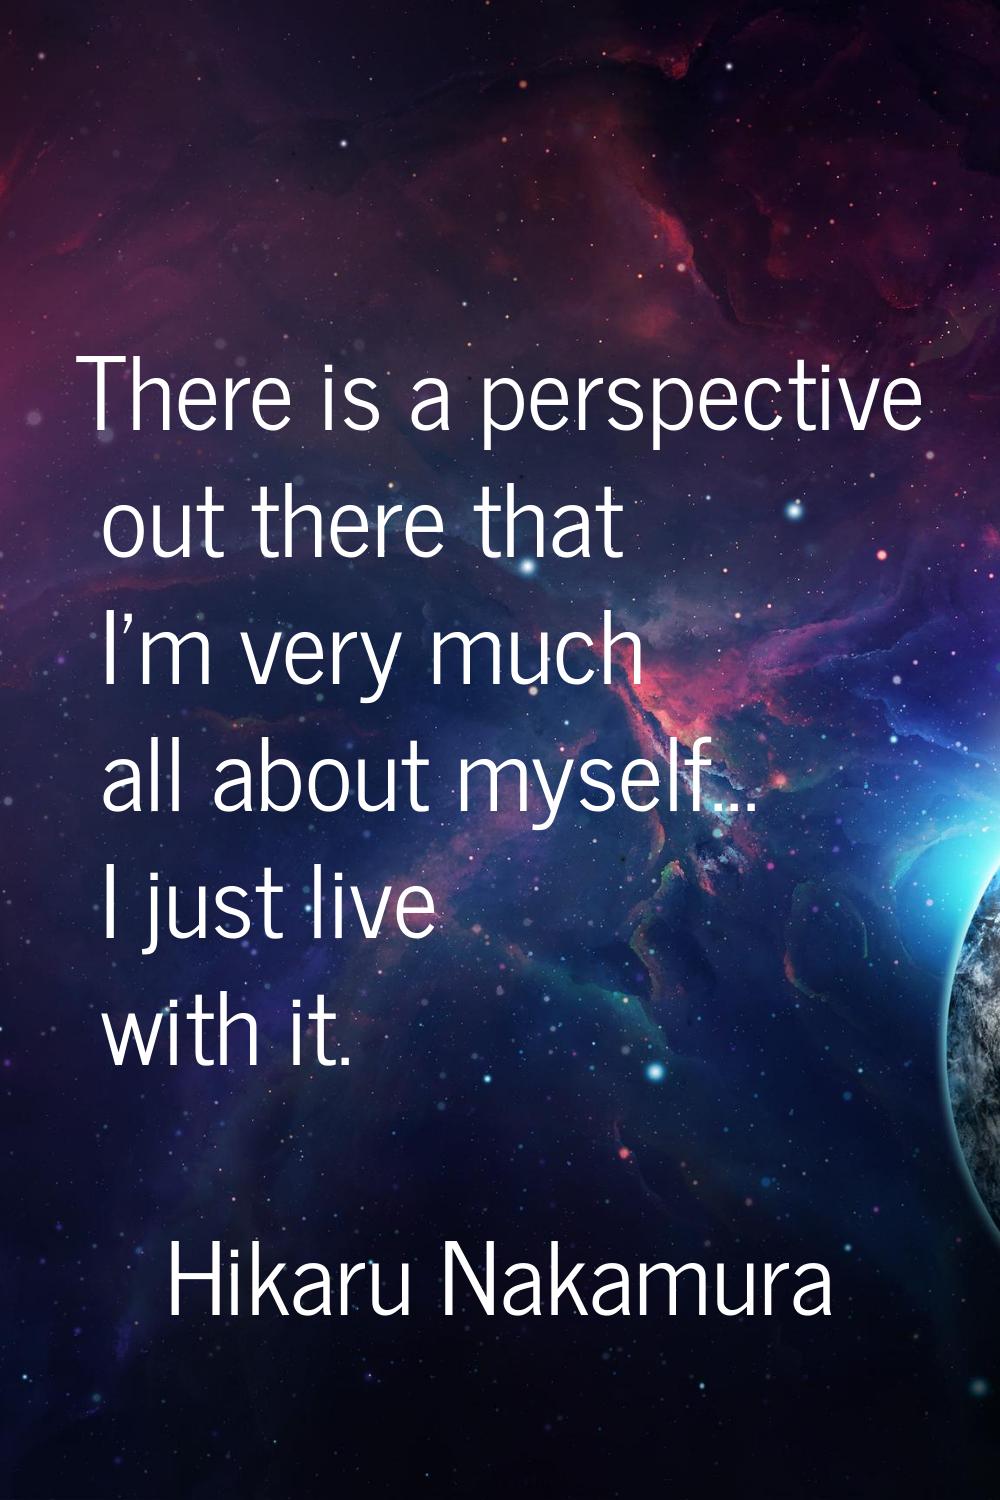 There is a perspective out there that I'm very much all about myself... I just live with it.